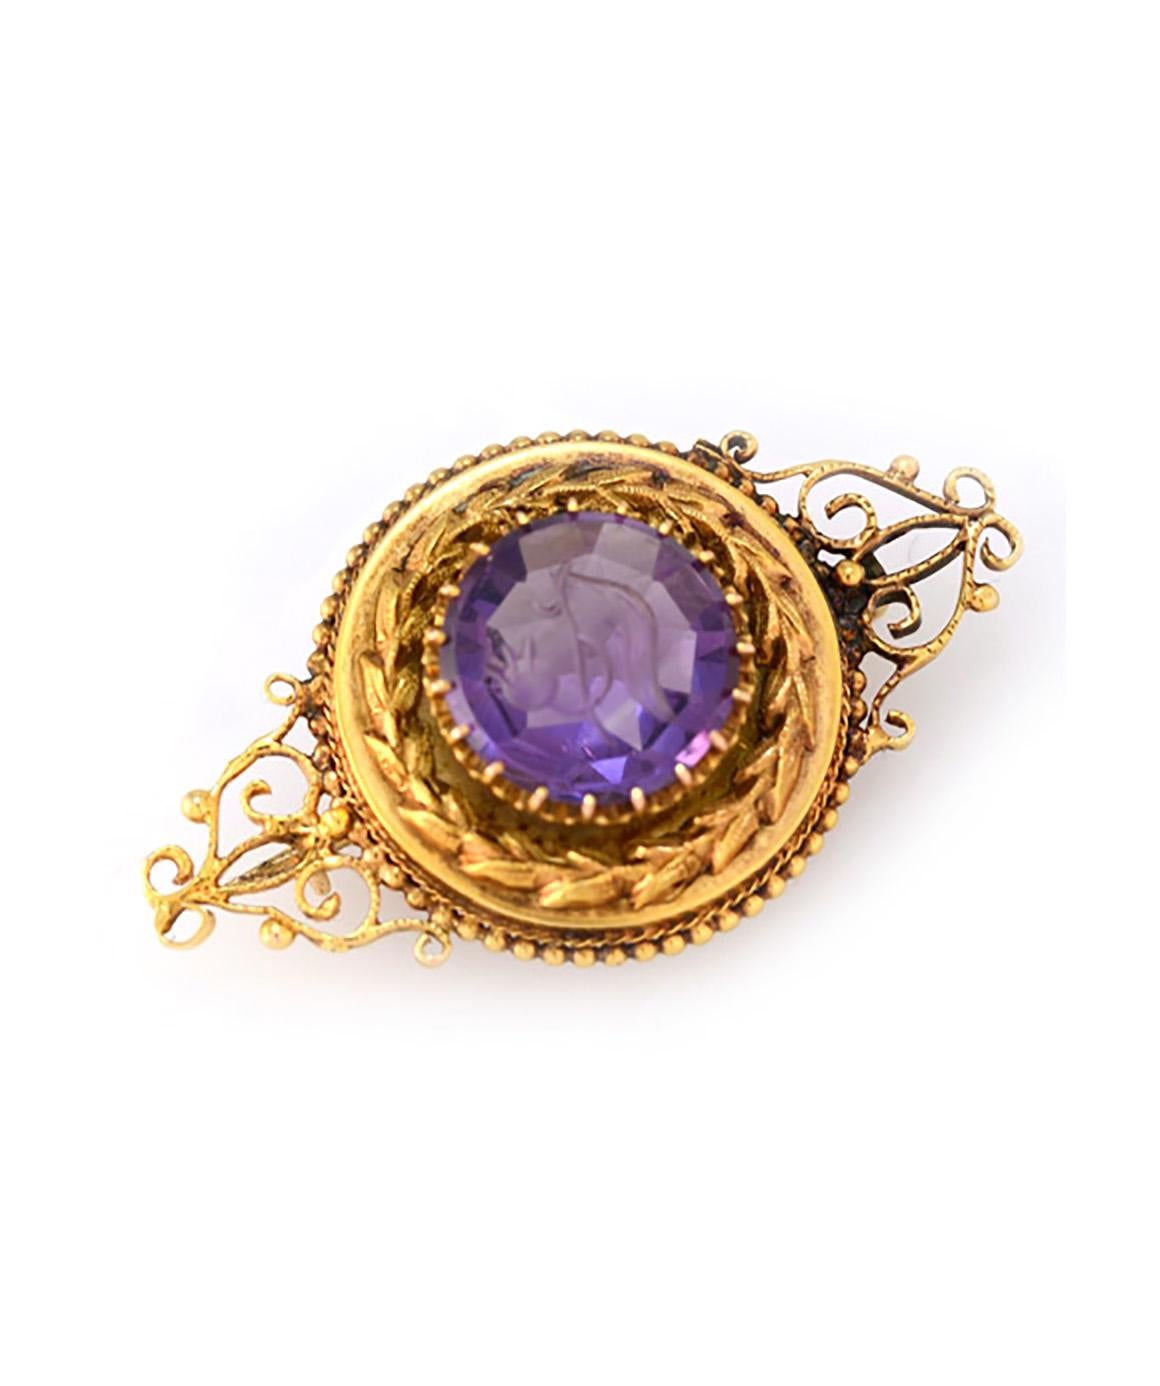 Solid 14K Yellow Gold Genuine Amethyst Antique Pin!  This pin weighs 6.1 grams, and measures about 1 x 1.5 inches.  The centre stone is carved with a rose, and measures about 6.17ct. Please see photos for details!